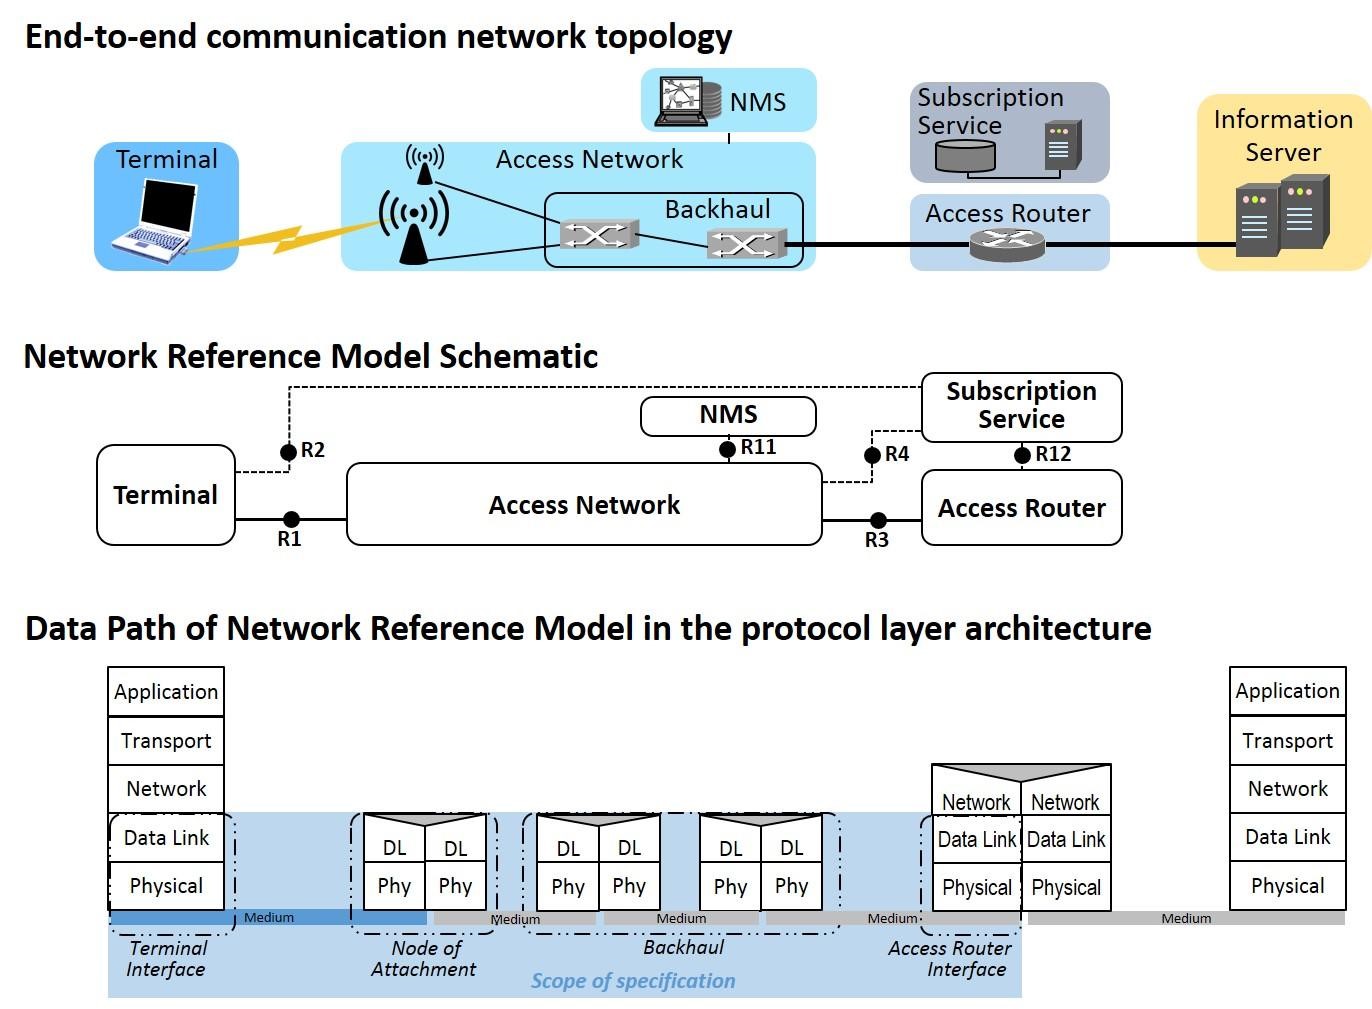 Fig. 3. Mapping of the network reference model to real topologies and its relation to the end-to-end data path.